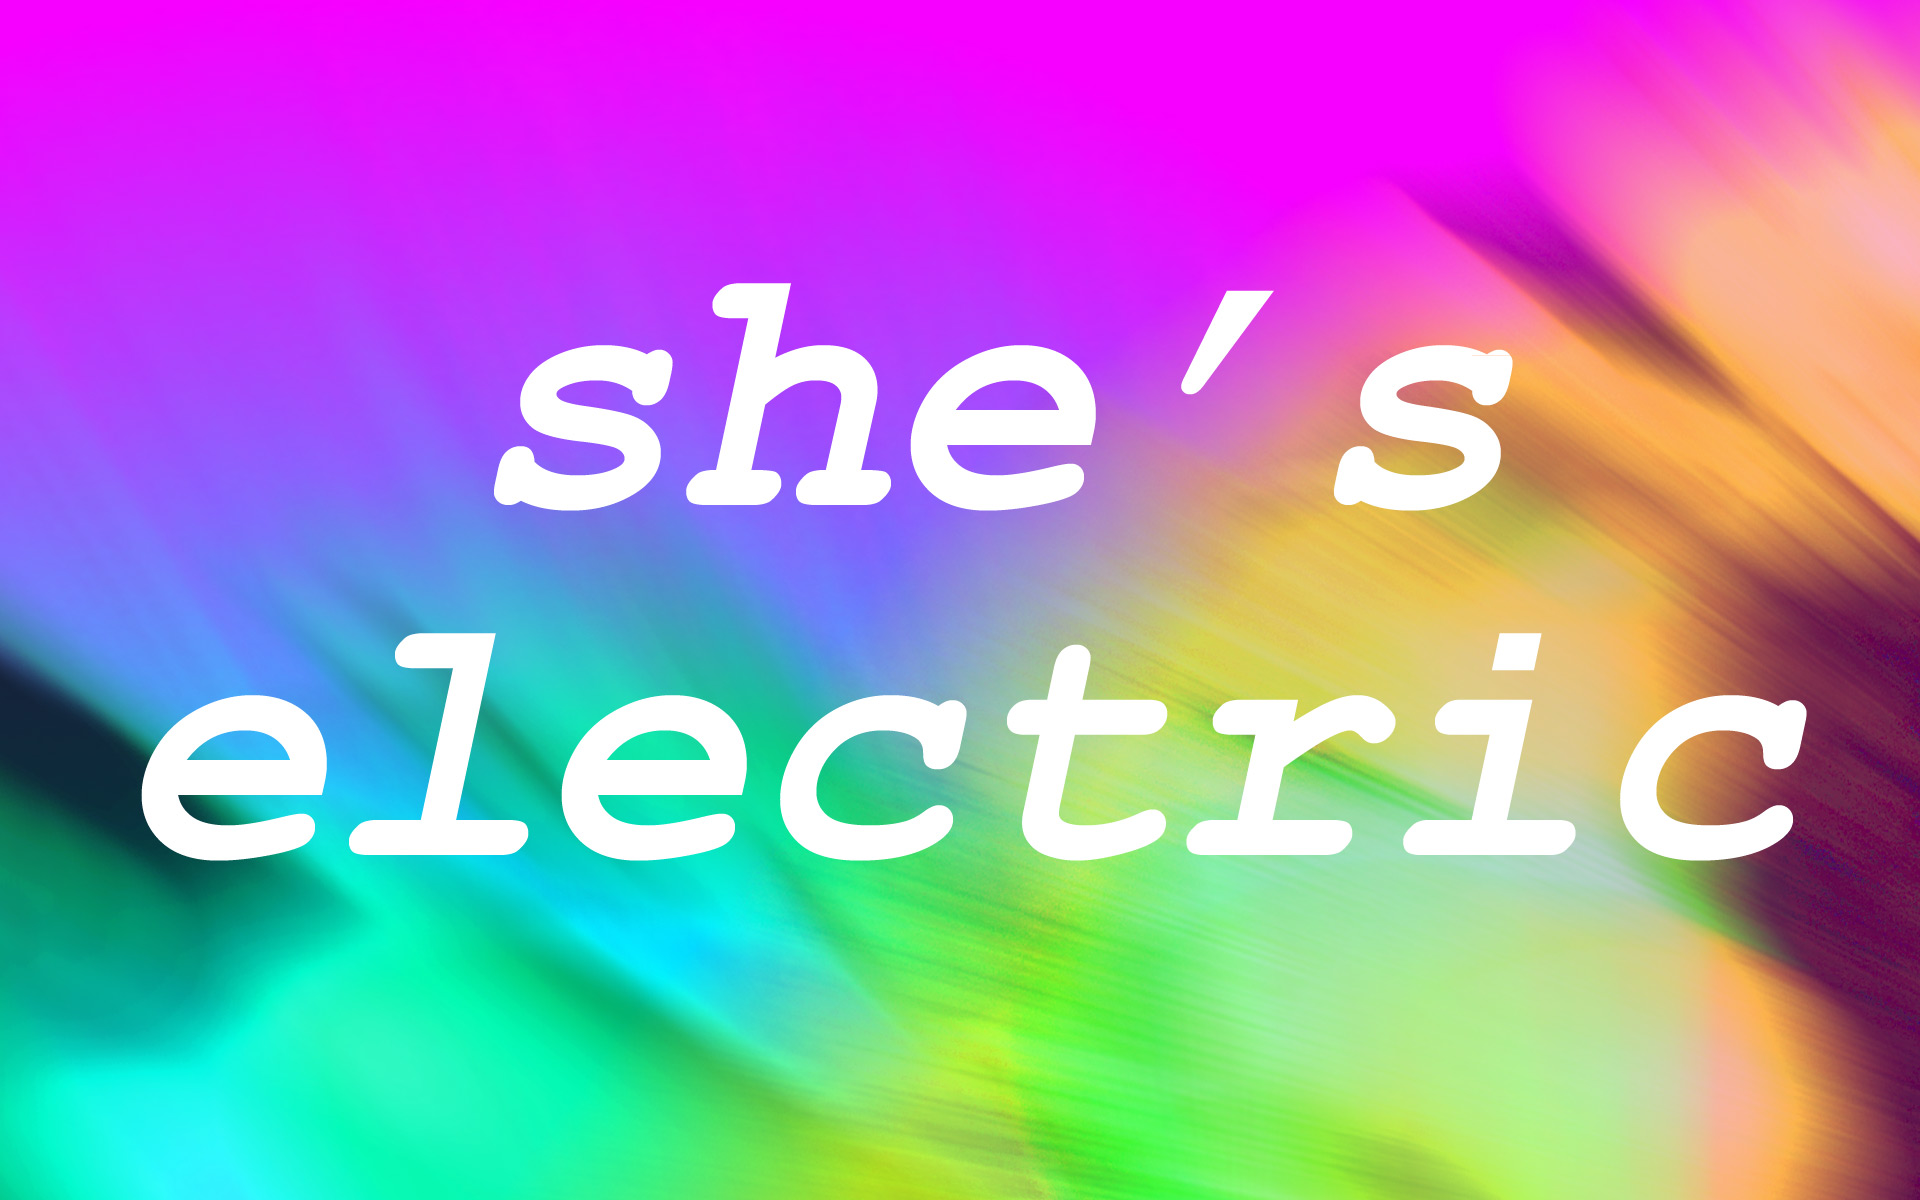 She’s electric